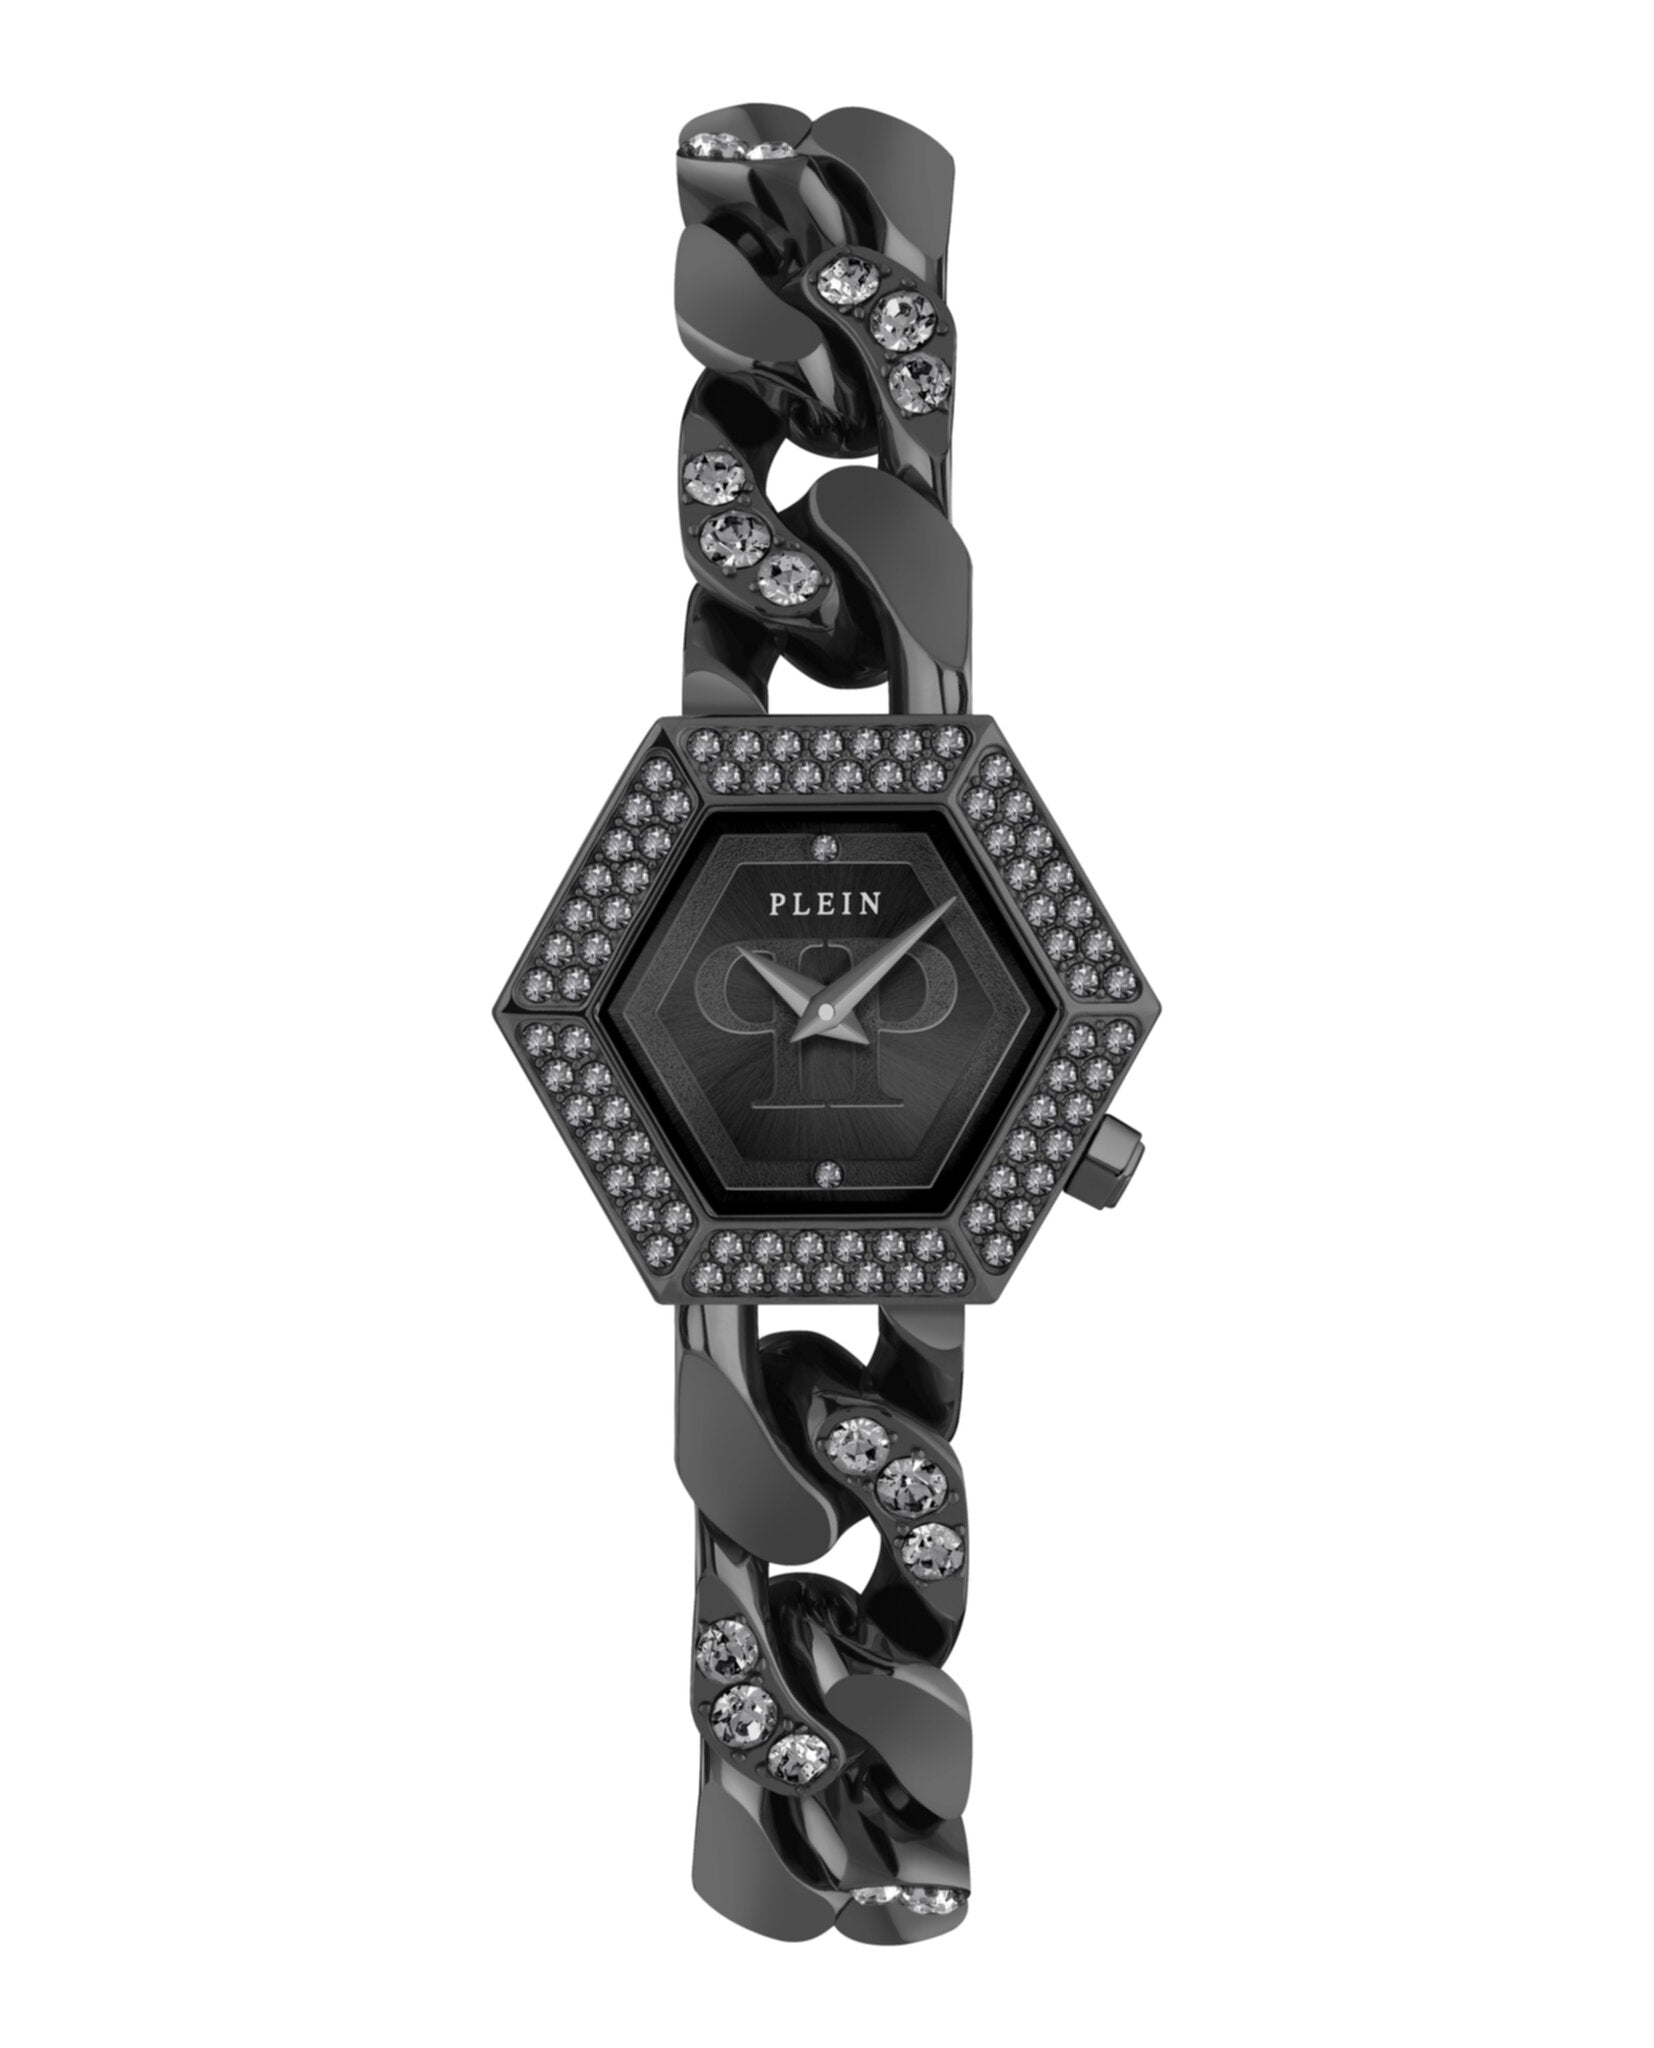 The Hexagon Groumette Crystal Watch